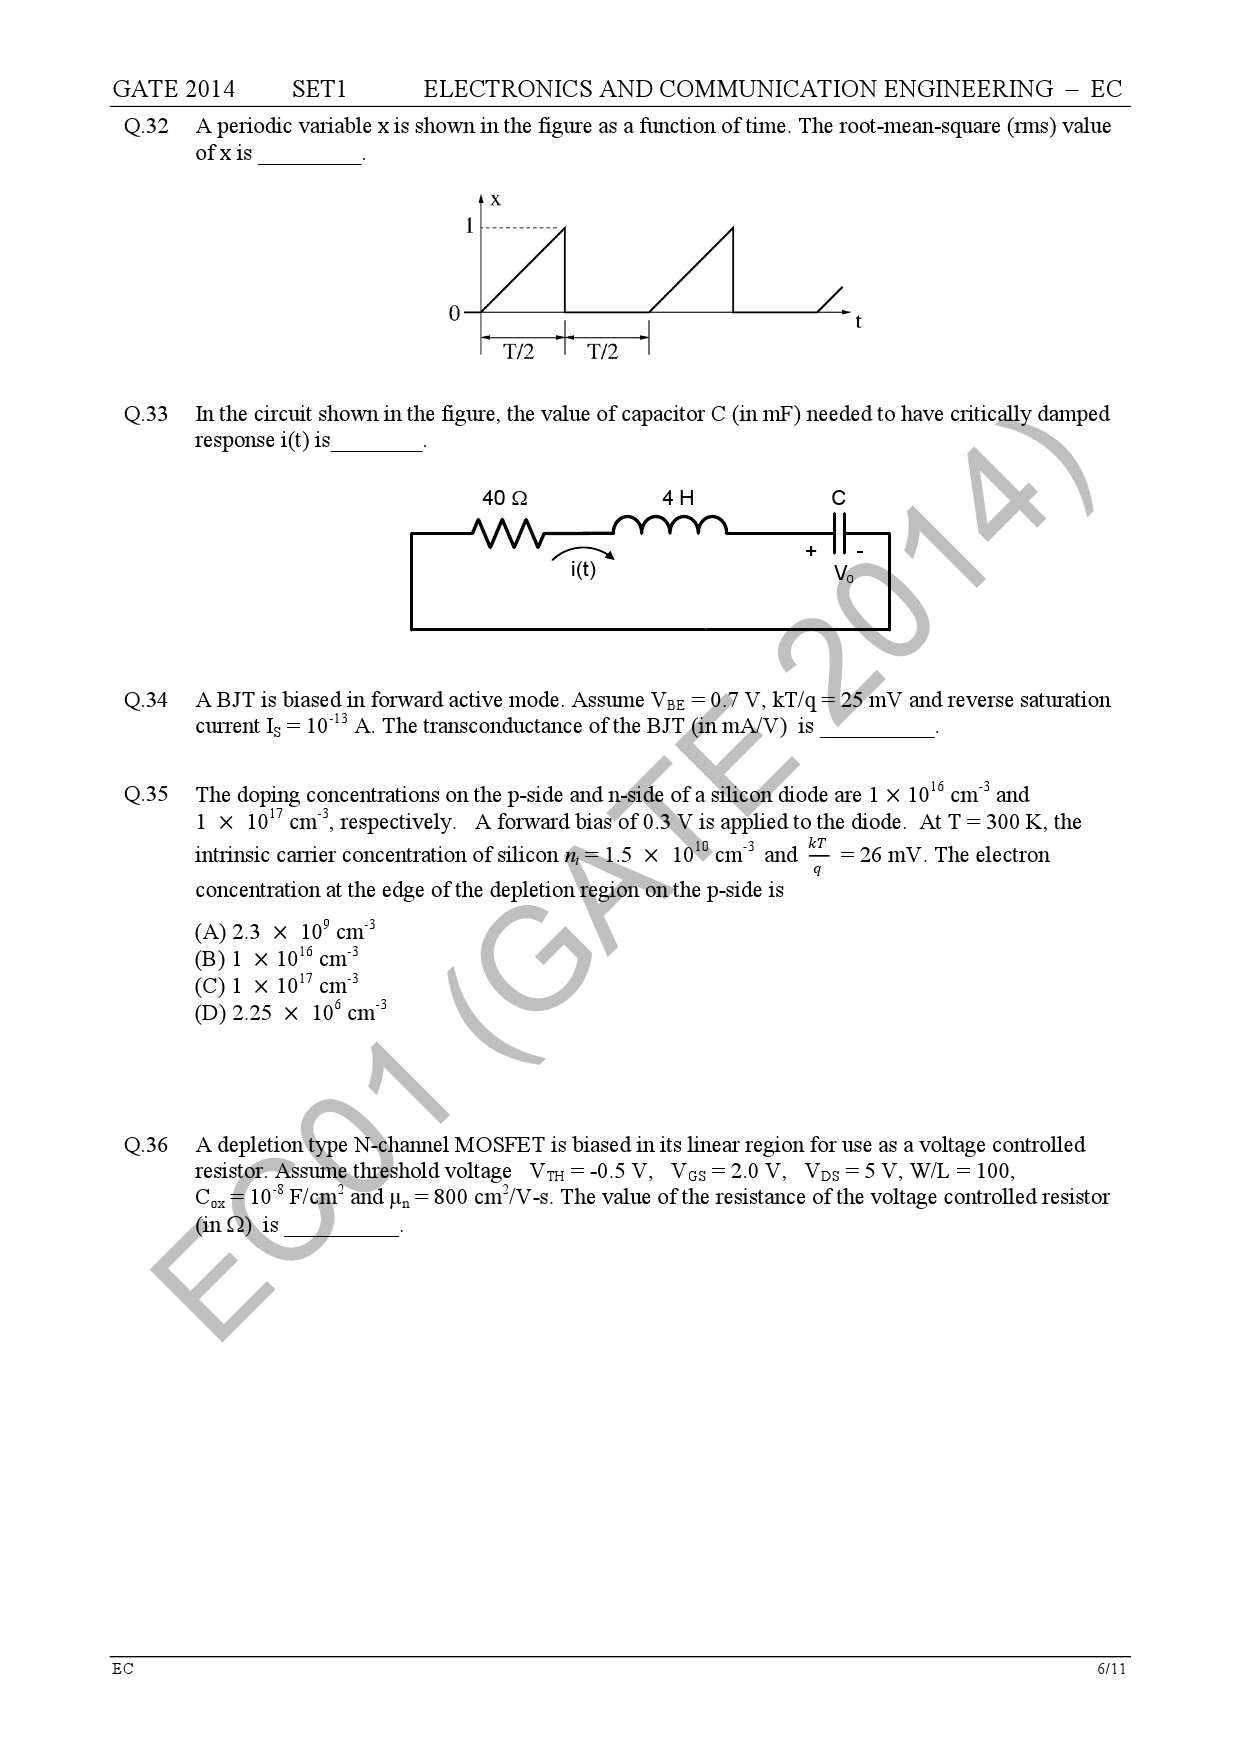 GATE Exam Question Paper 2014 Electronics and Communication Engineering Set 1 12